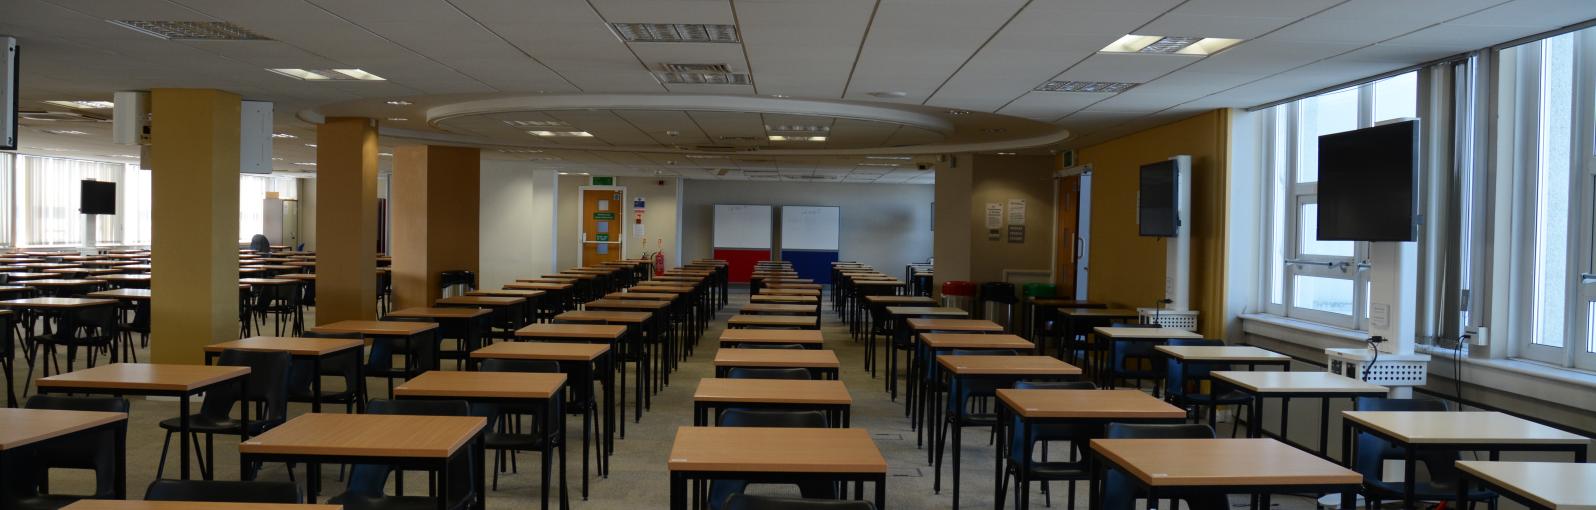 Tables set out ready for an exam